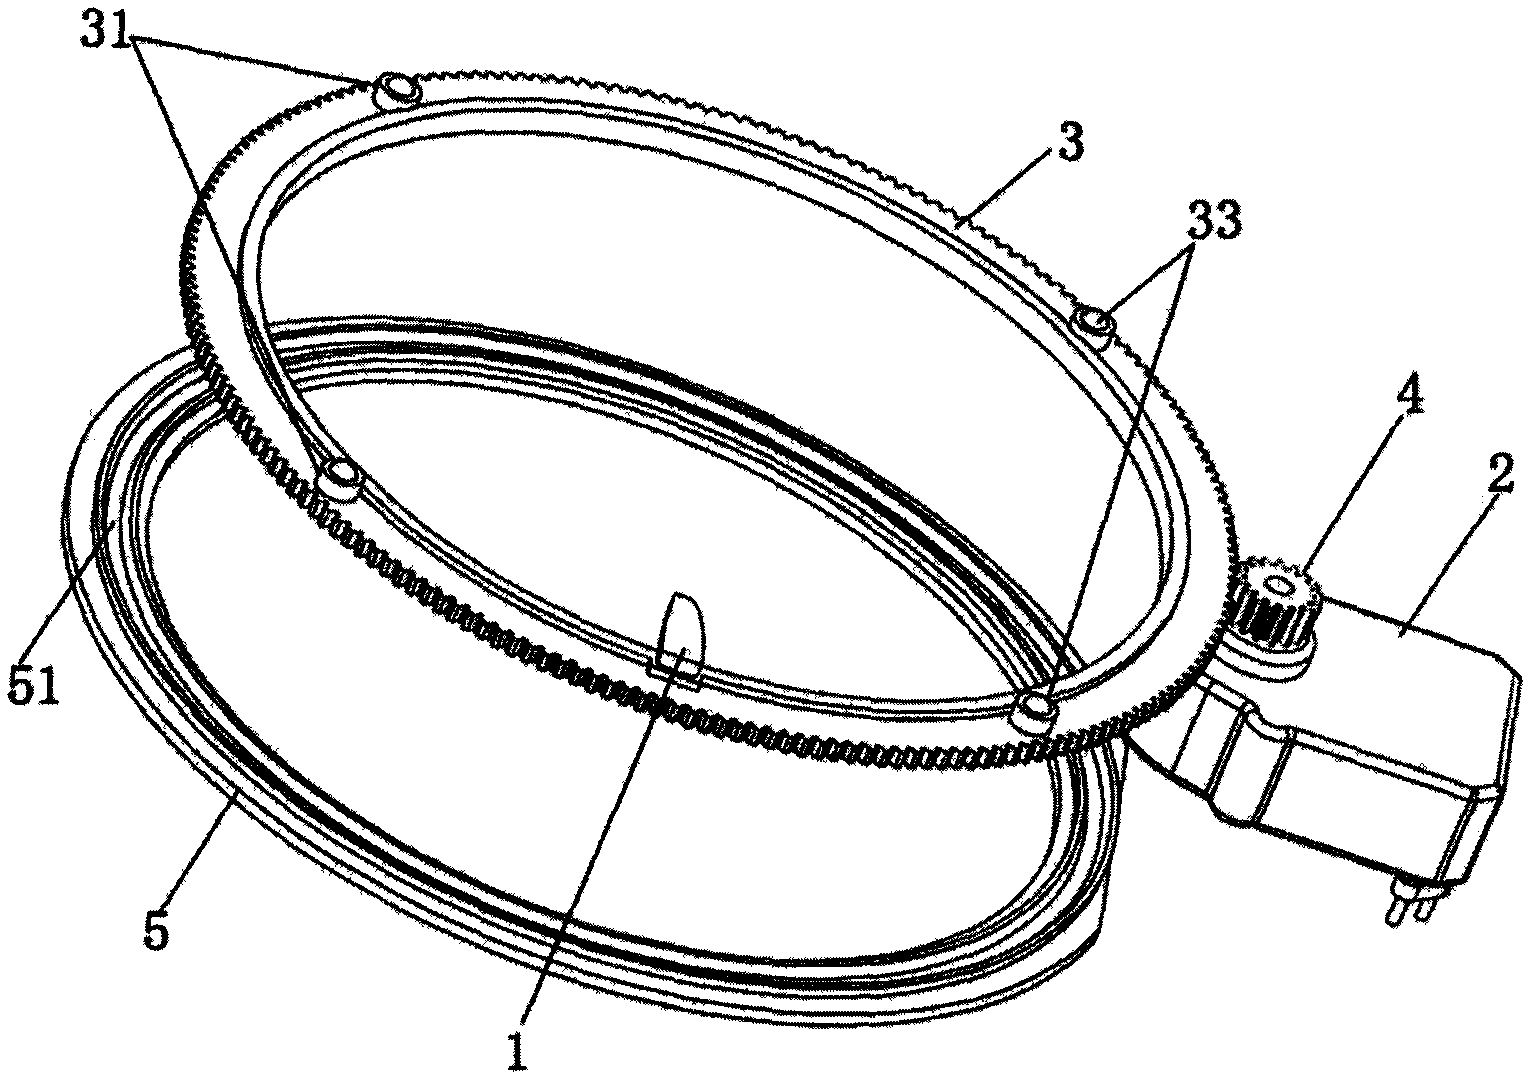 Annular pointer motion structure for automobile meter